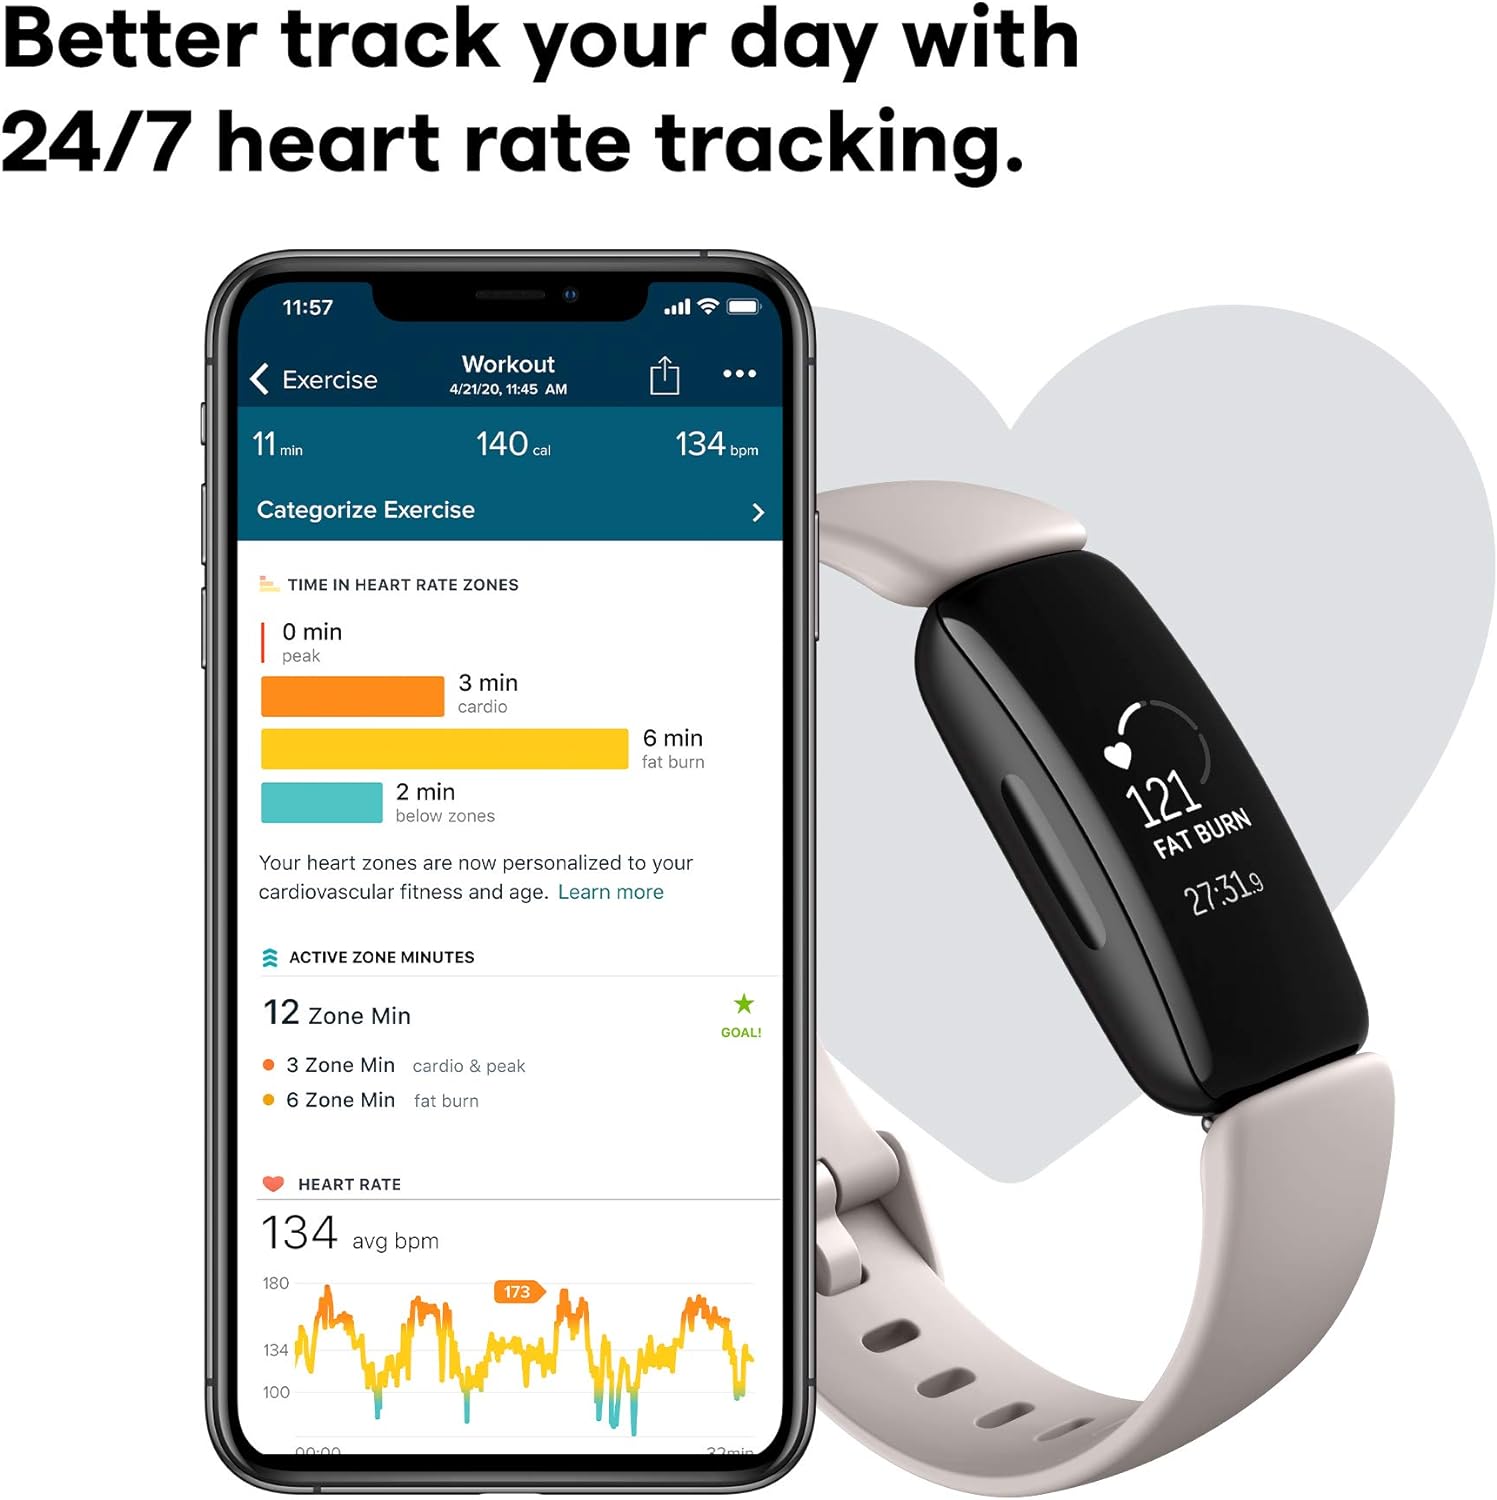 Fitbit Inspire 2, Health & Fitness Tracker With A Free 1-Year Fitbit Premium Trial, 24/7 Heart Rate & Up To 10 Days Battery, Black